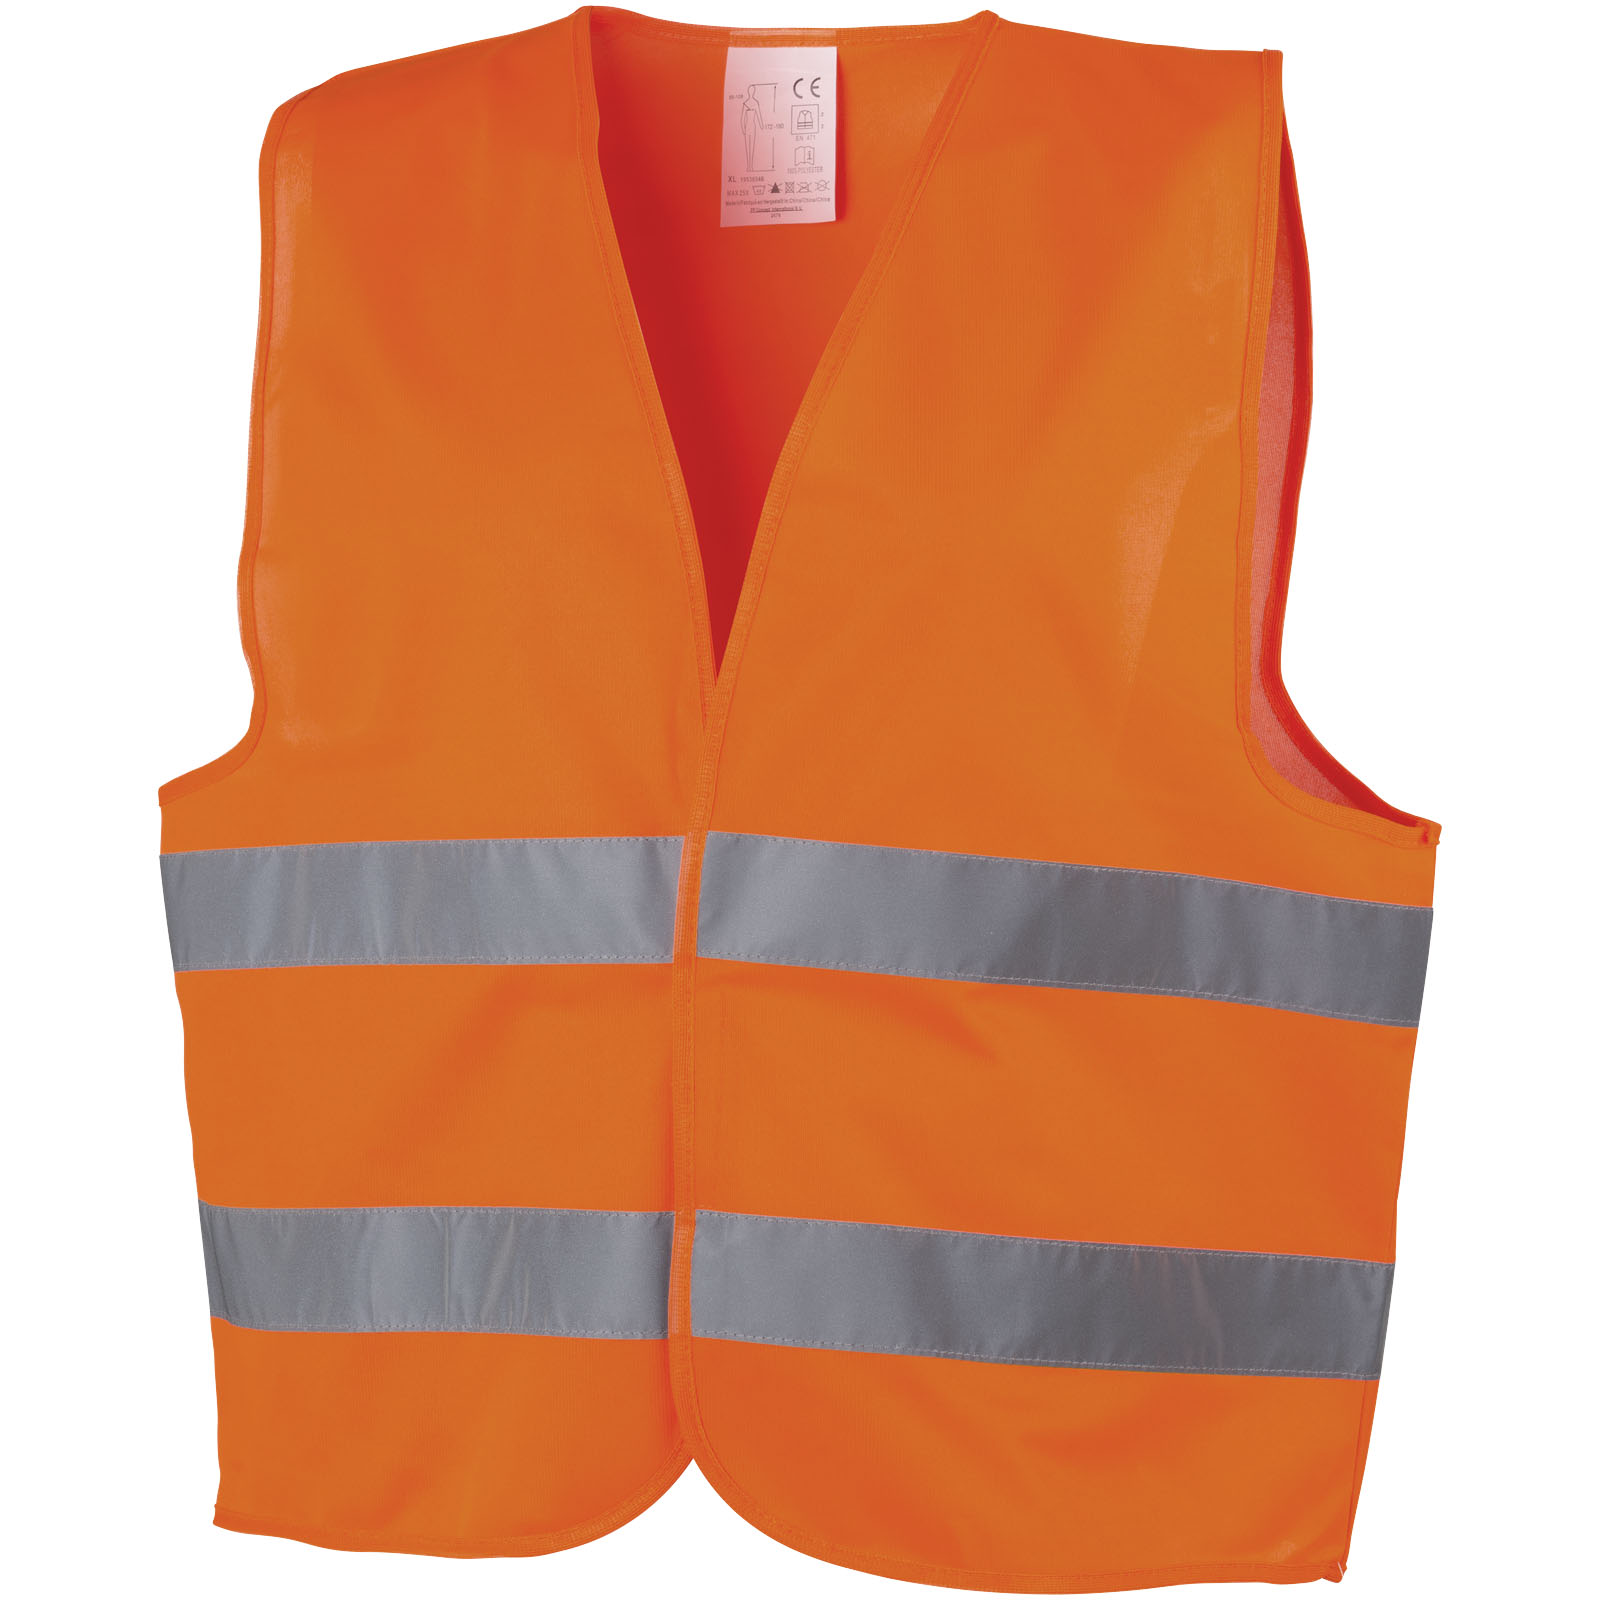 Tools & Car Accessories - RFX™ See-me XL safety vest for professional use